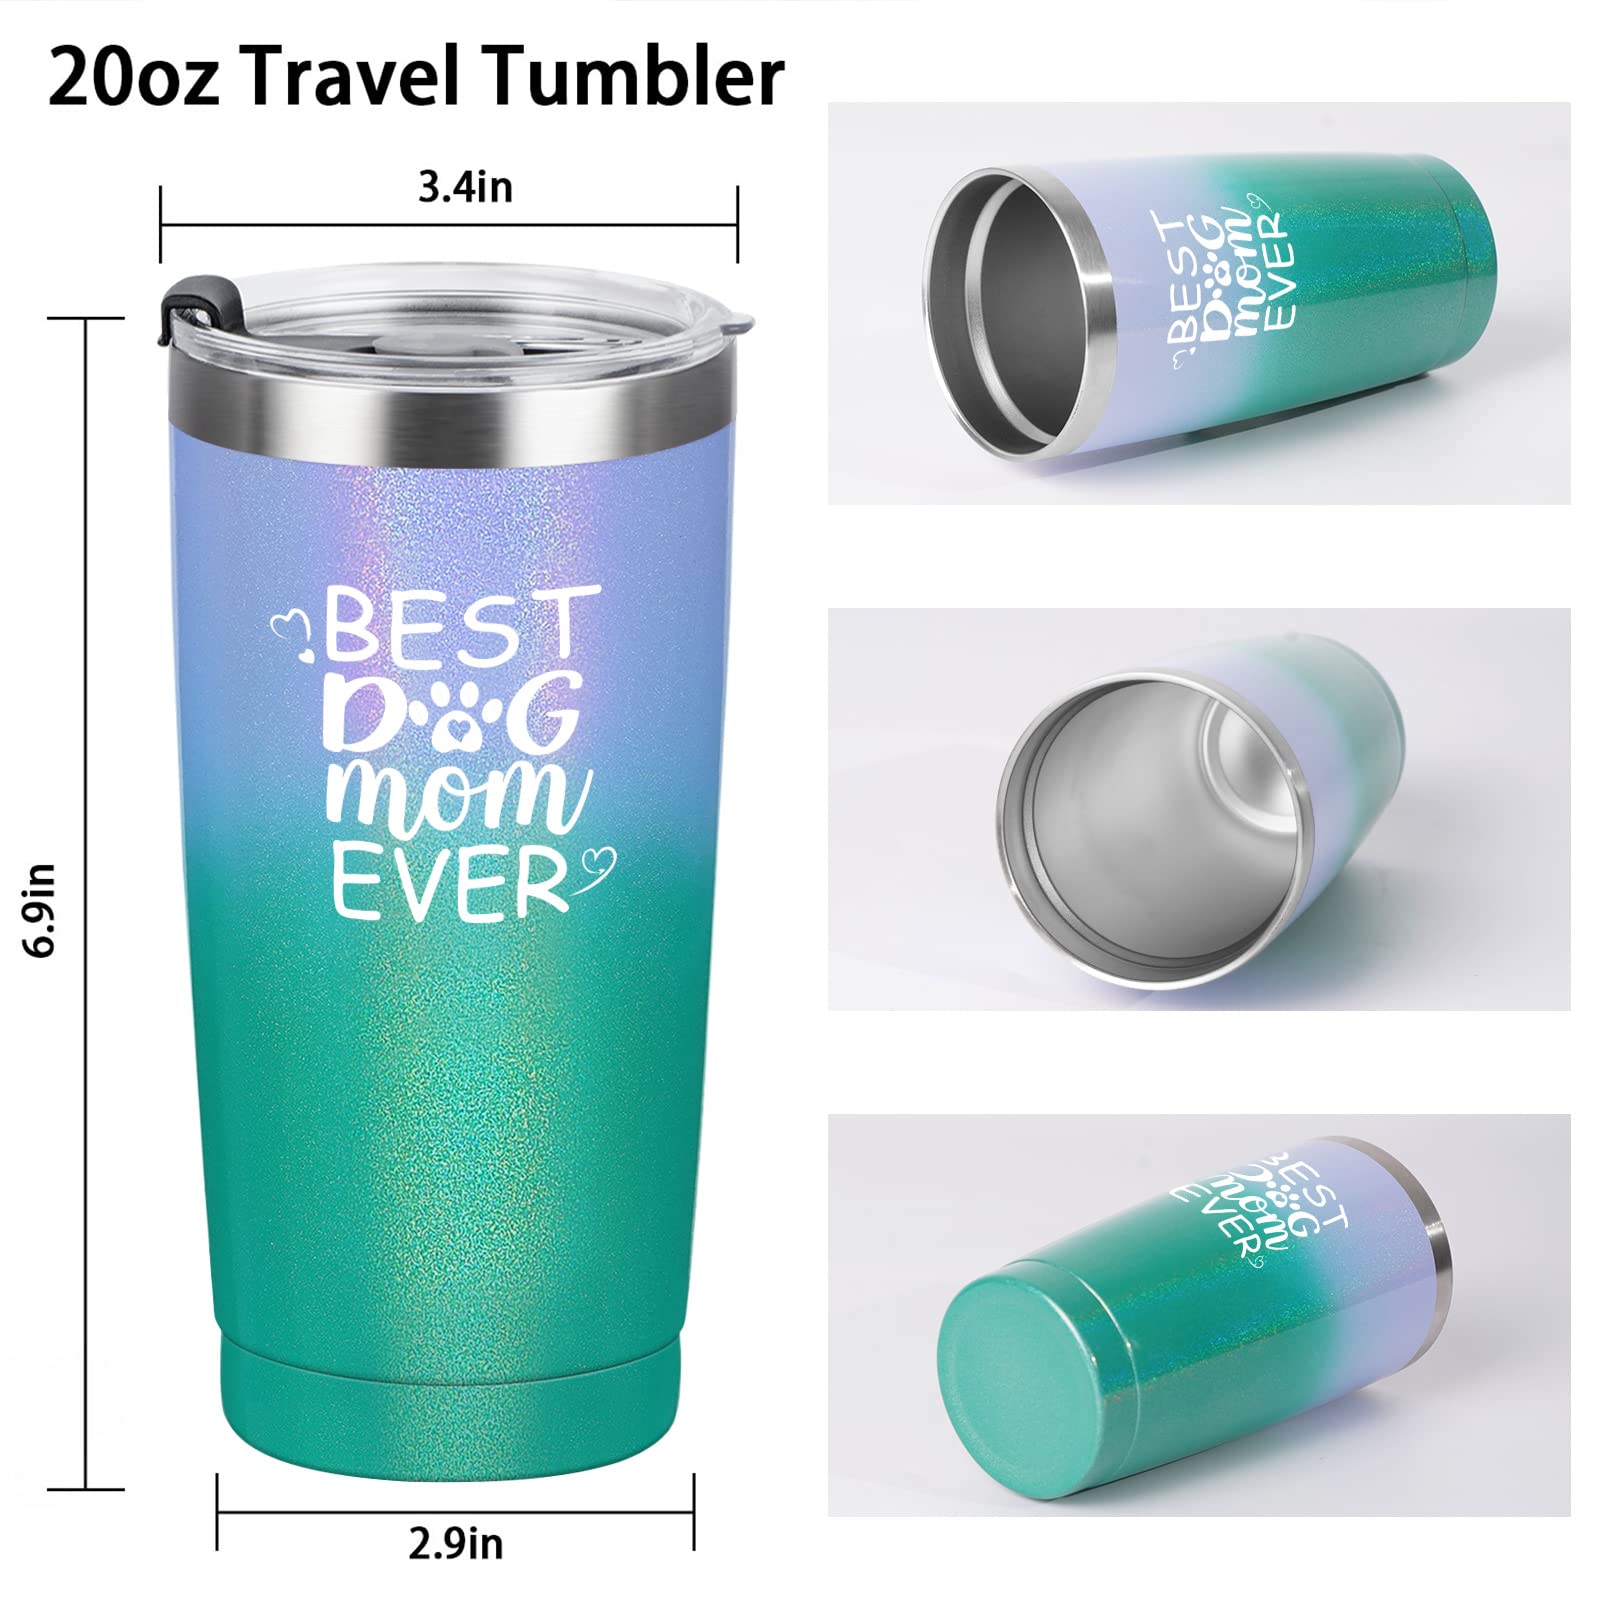 Gtmileo Dog Mom Gifts for Women, Best Dog Mom Ever Travel Tumbler, Funny Dog Lover Gifts, Mothers Day Gifts for Dog Owner Dog Mama Fur Mom, 20oz Stainless Steel Insulatd Tumbler with Lids, Gradient